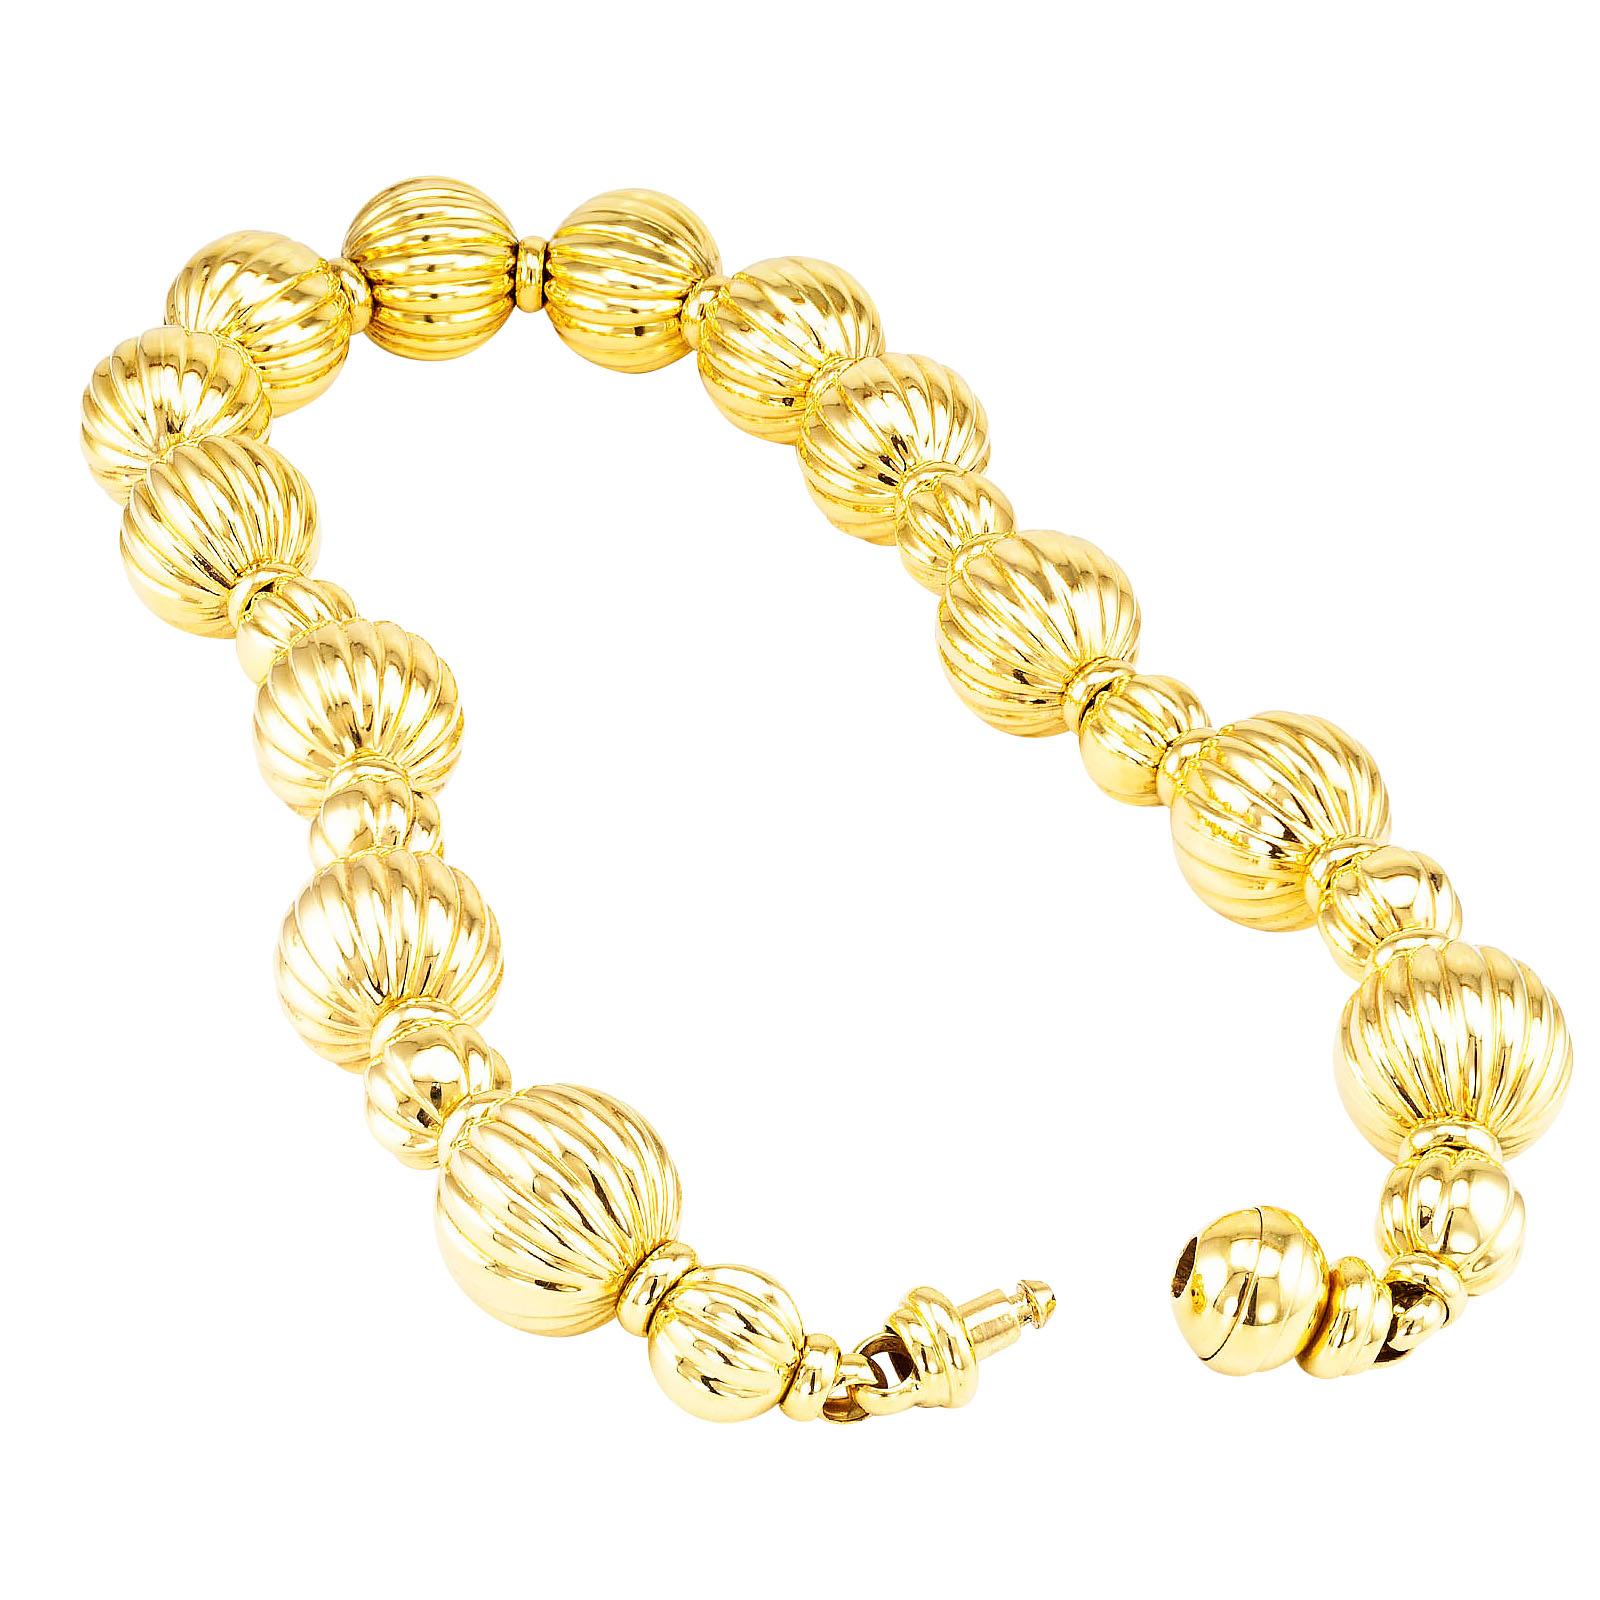 Wide Fluted yellow gold bead necklace circa 1990.

DETAILS:
METAL: 18-karat yellow gold

MEASUREMENTS: larger bead diameter approximately 7/8” or 22.5 mm (2.3 cm),             19.5” (49.5 cm) long overall.

WEIGHT:  137.1 grams

CONDITION: high